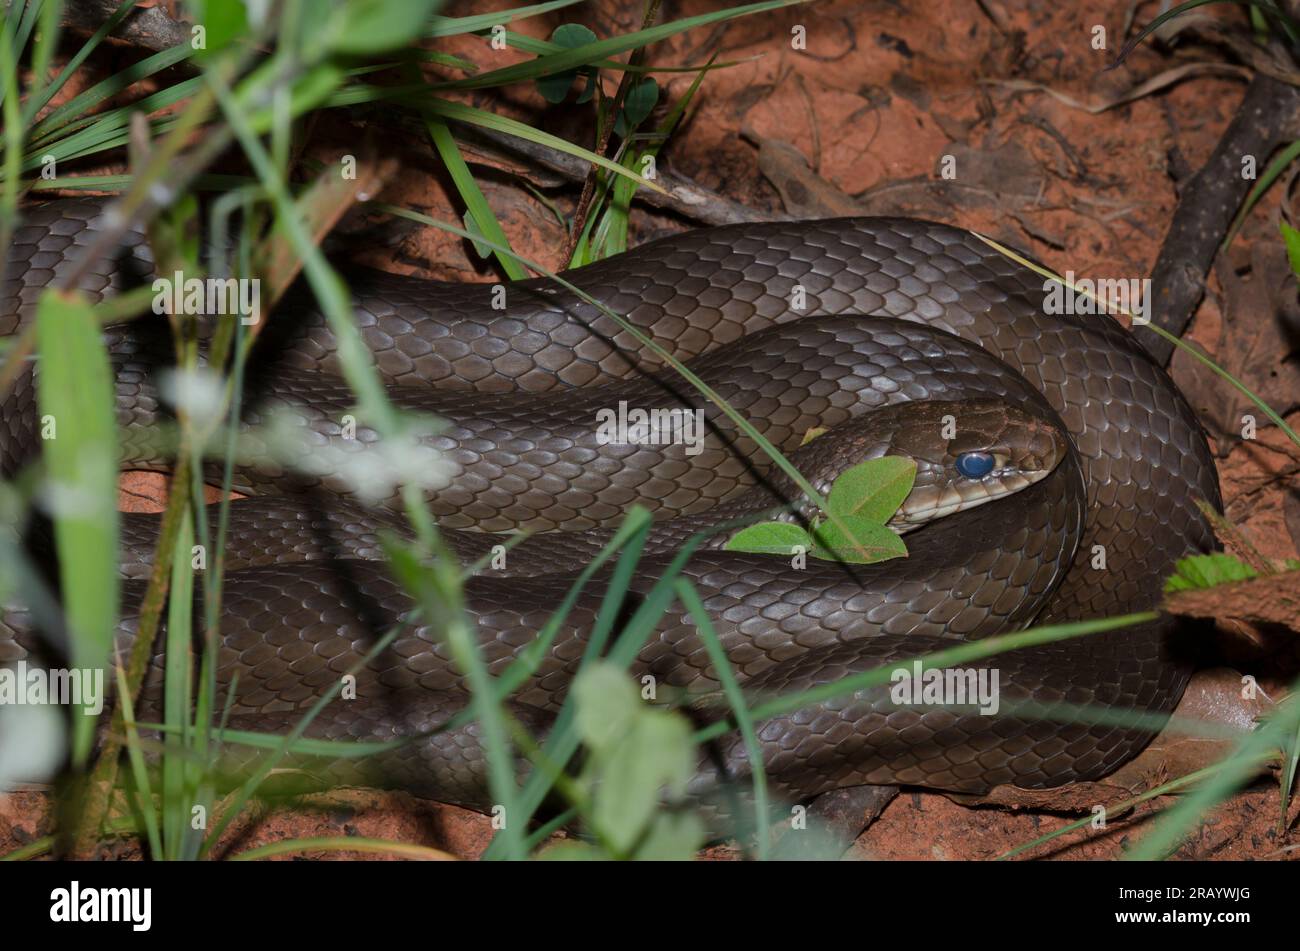 Yellow-bellied Racer, Coluber constrictor Stock Photo